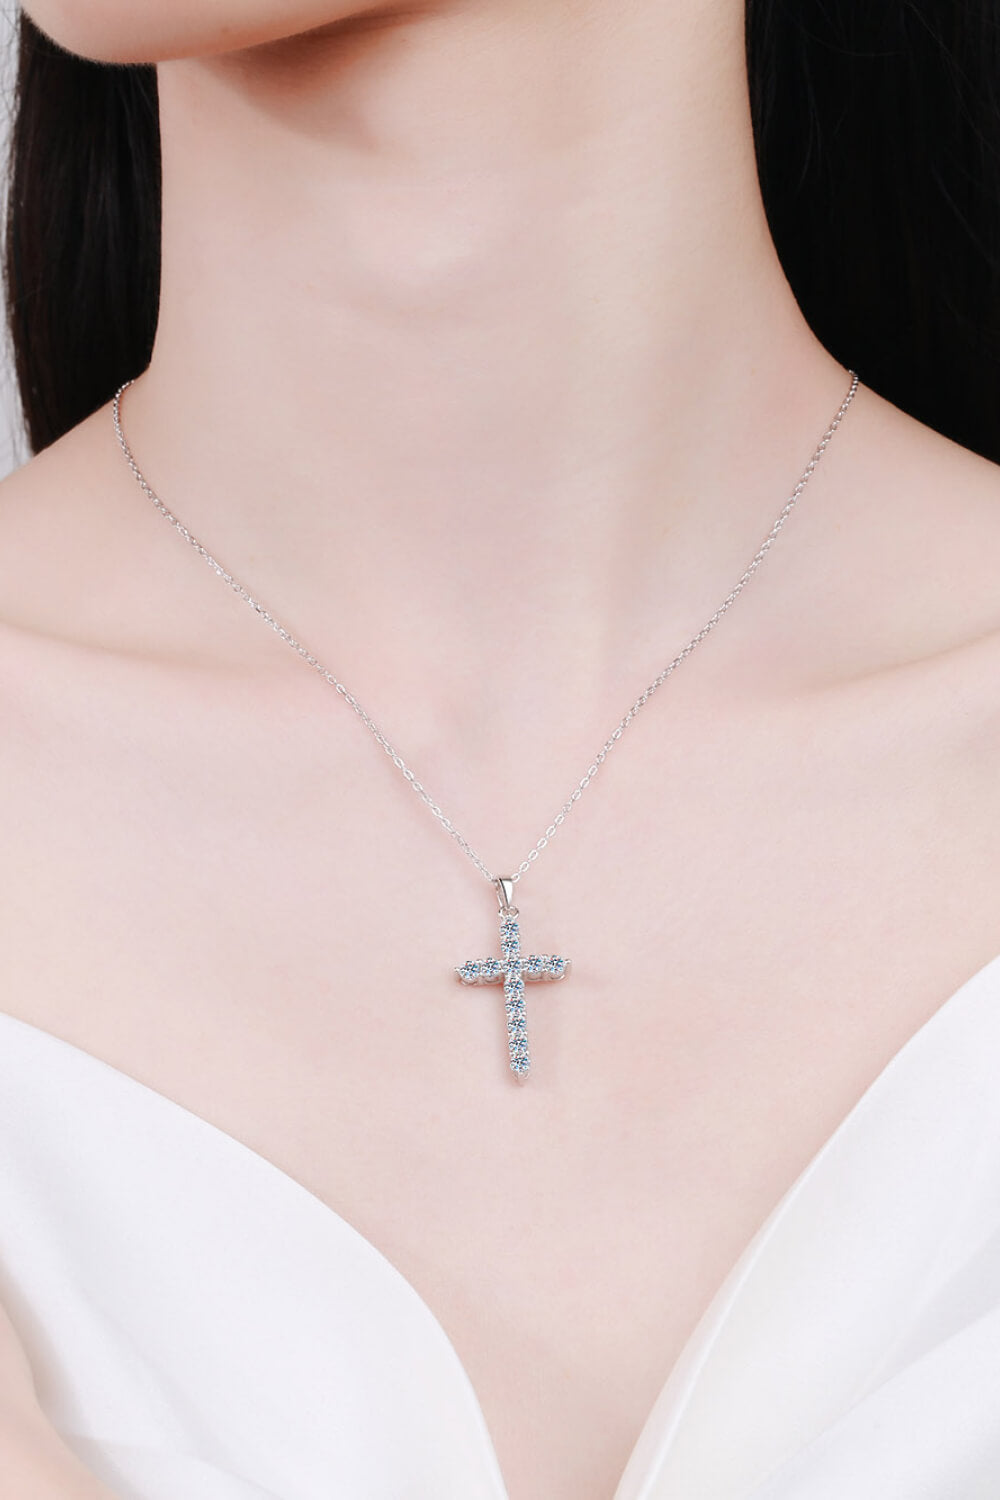 Moissanite Cross Pendant Chain Necklace, Women's Necklace, Gift for her, Jewelry, Fashion